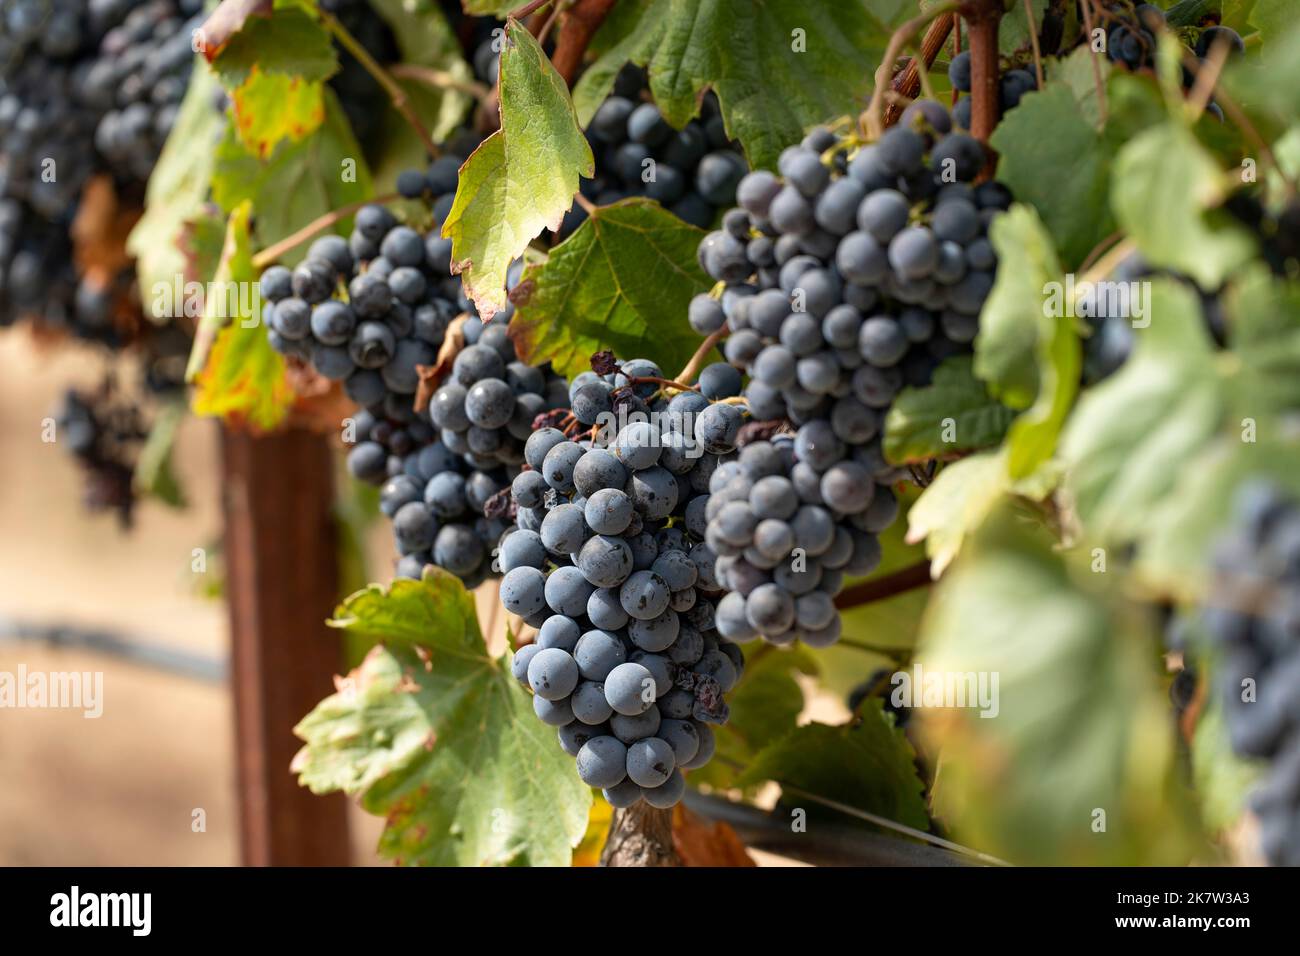 Clusters of red wine grapes growing in vineyard Stock Photo